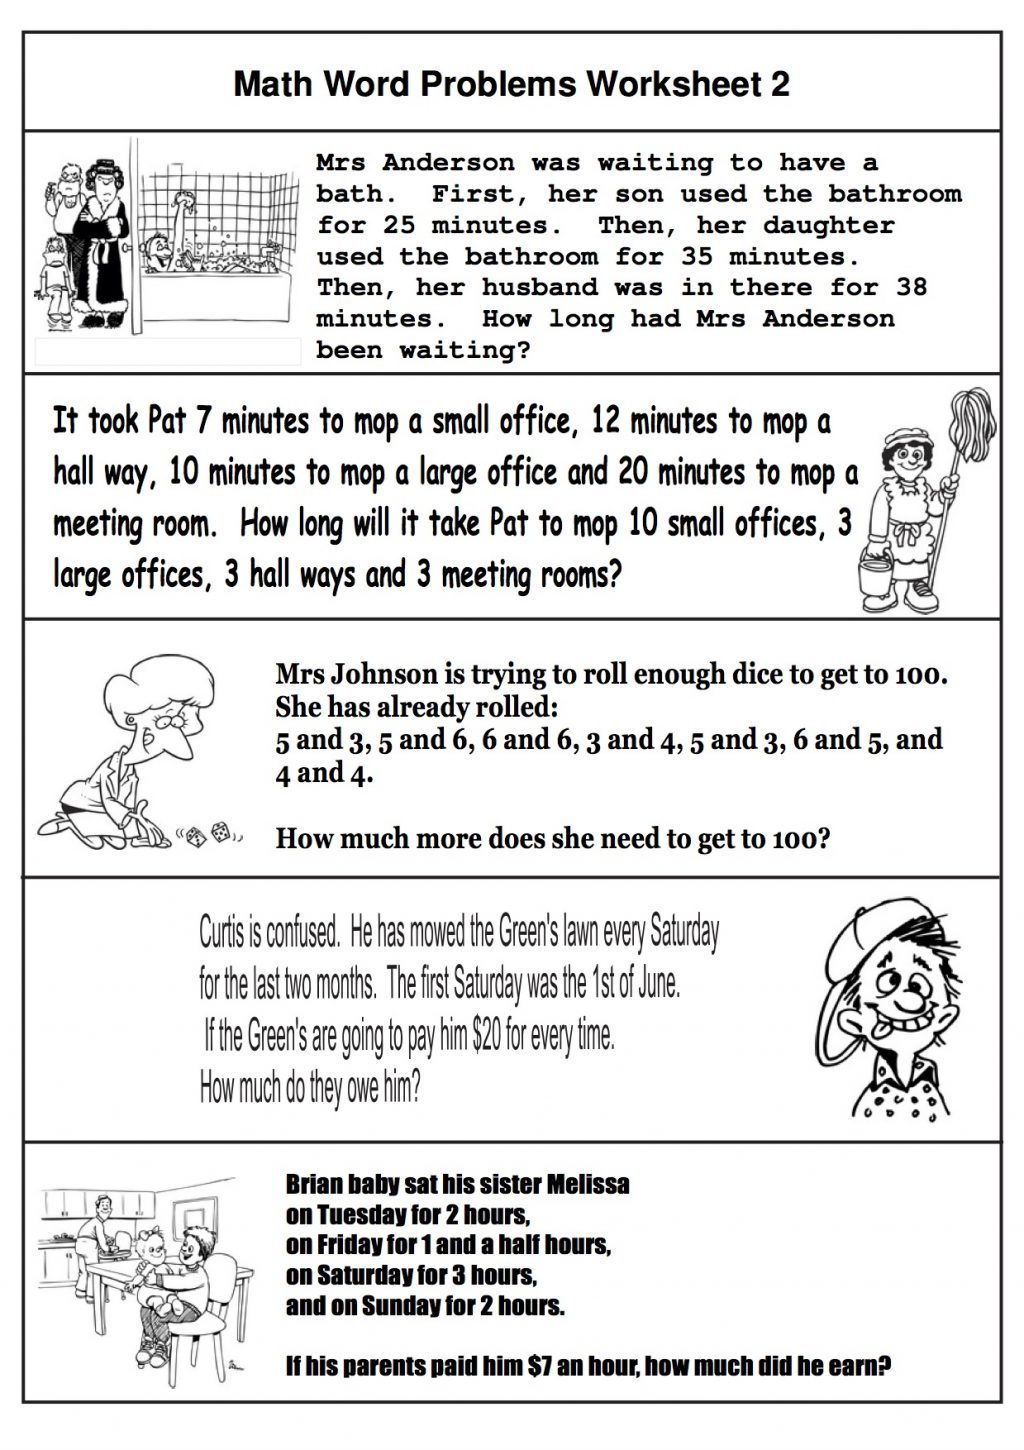 2nd-grade-math-word-problems-best-coloring-pages-for-kids-2nd-grade